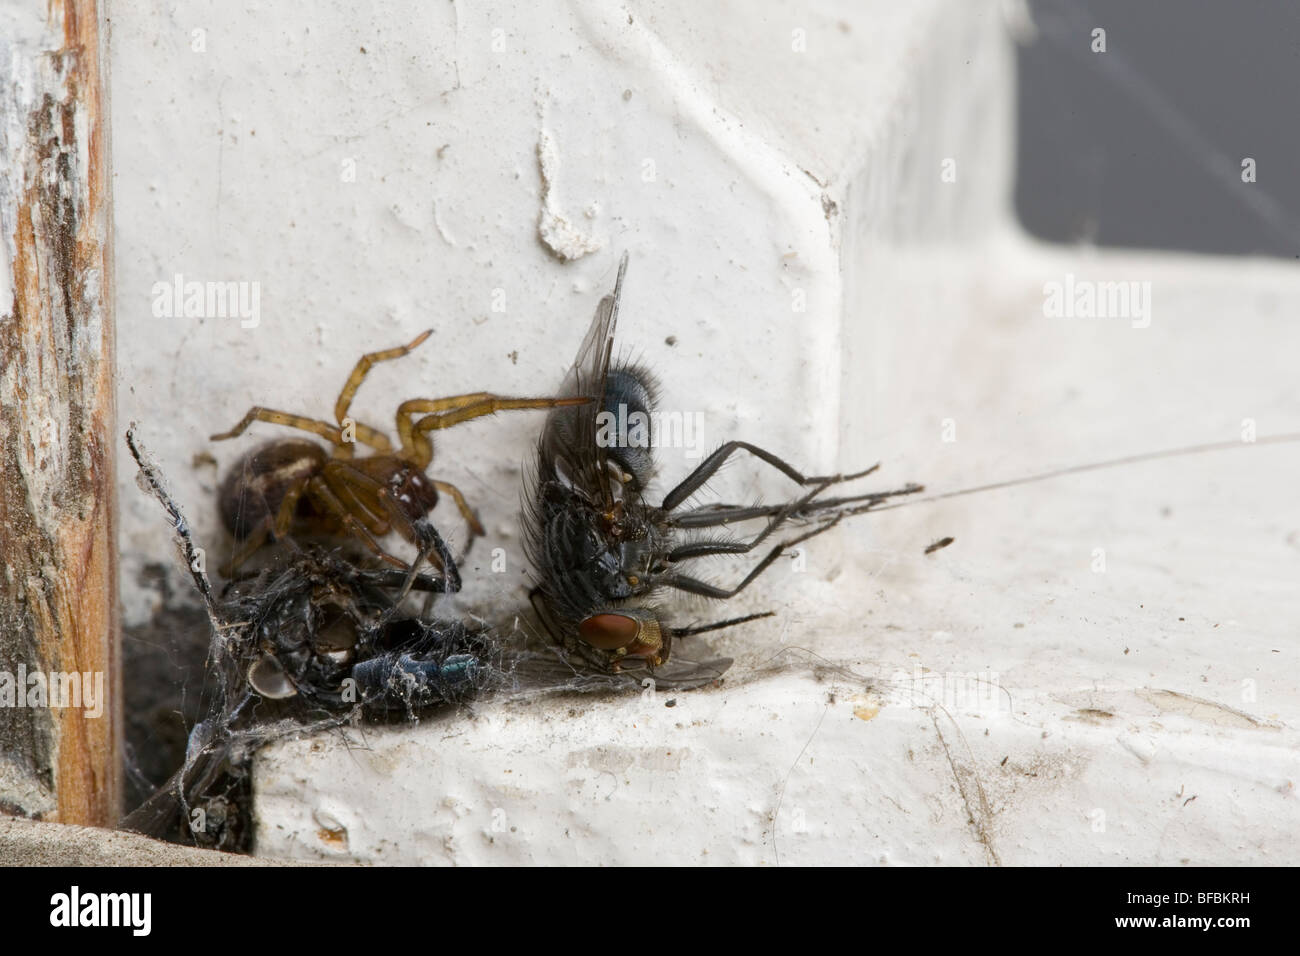 A common house spider (Tegenaria domestica) catching a house fly (Musca domestica) and dragging it back to its layer. Stock Photo